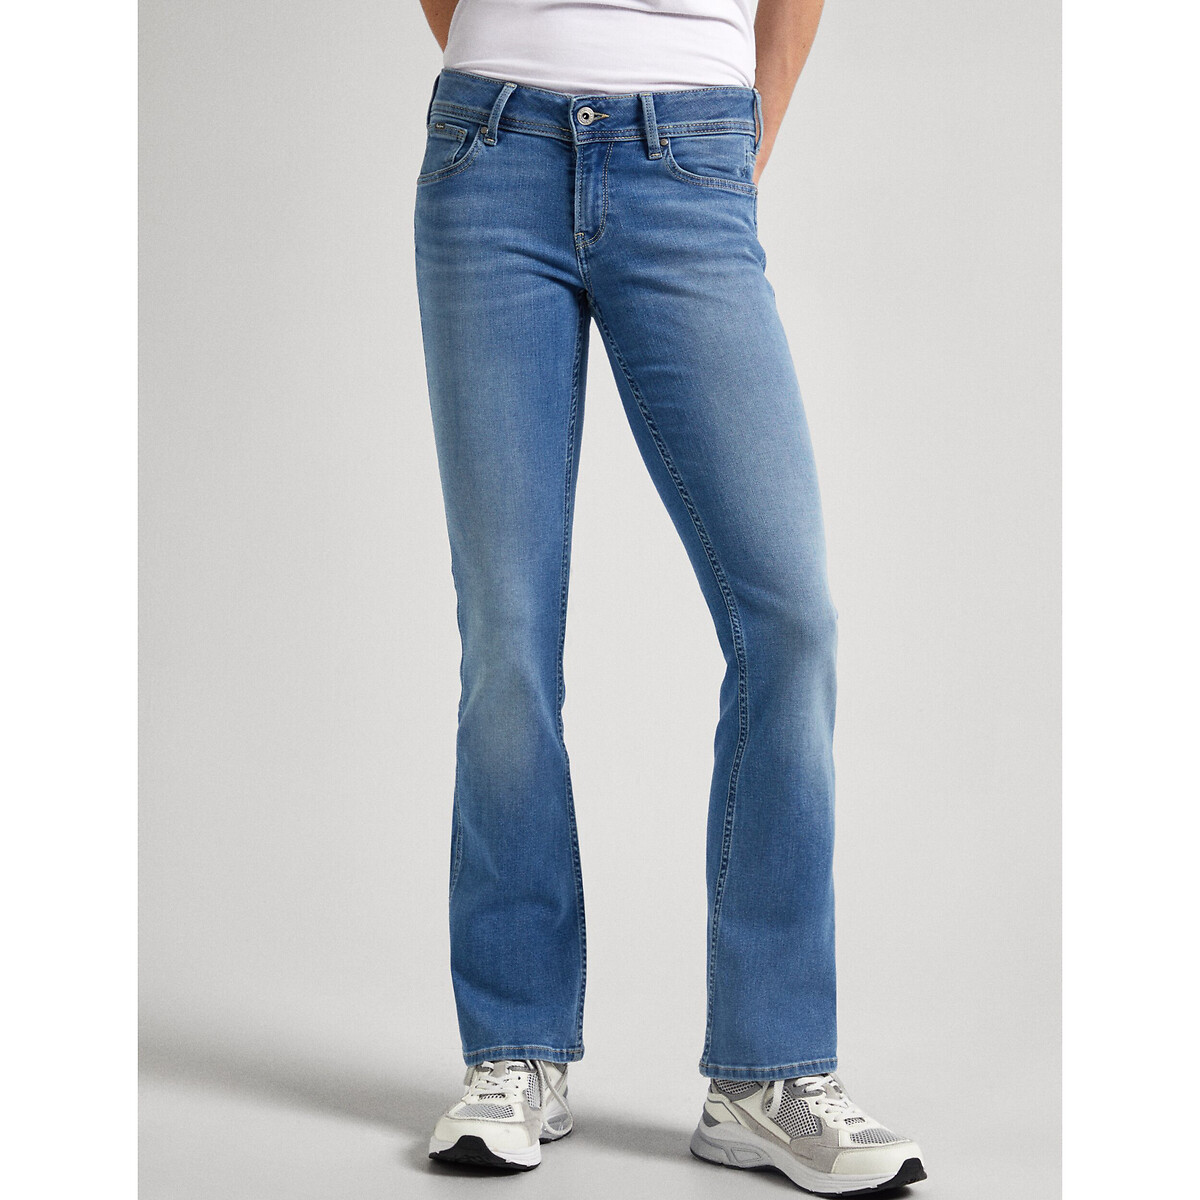 Image of Slim Fit Flared Jeans in Low Rise